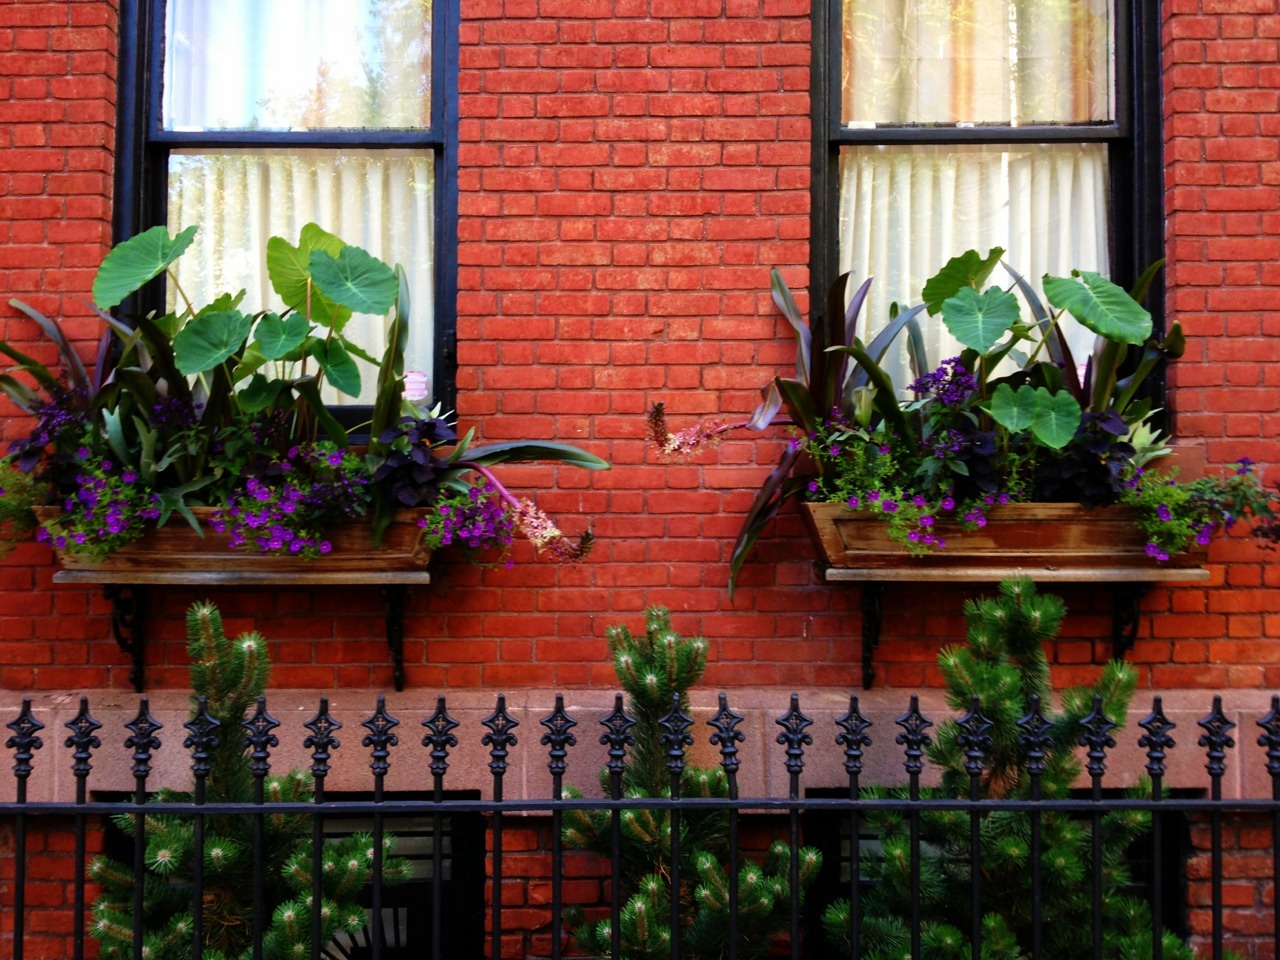 Window boxes on Commerce Street.
Ginger and I used to take this route during late night walks when Frank and I first started dating. He’d leave my apartment late at night and G and I would go for a long walk through the west village, listening to the...